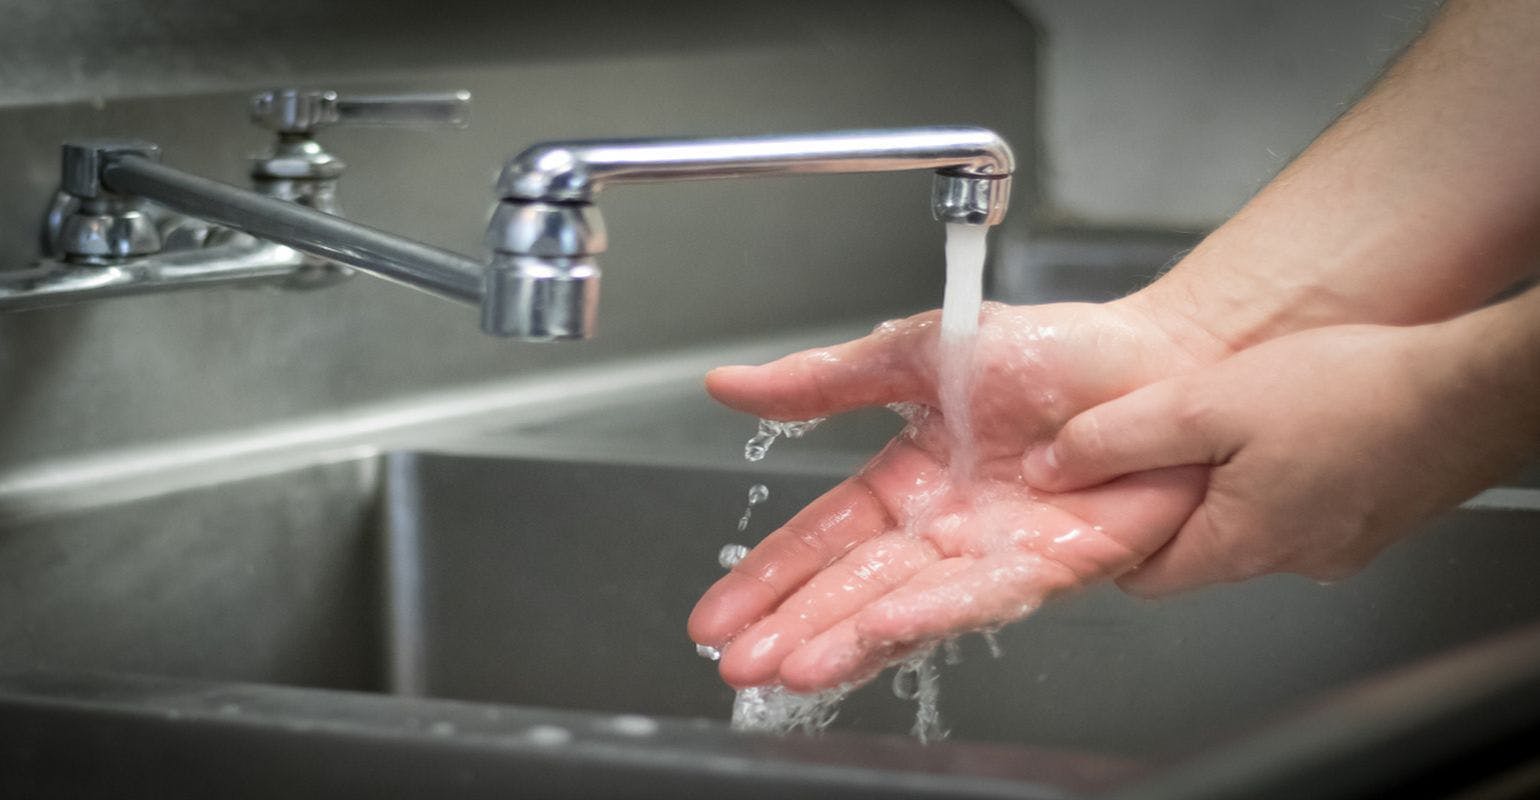 Top 5 Hand Hygiene Trends for 2019